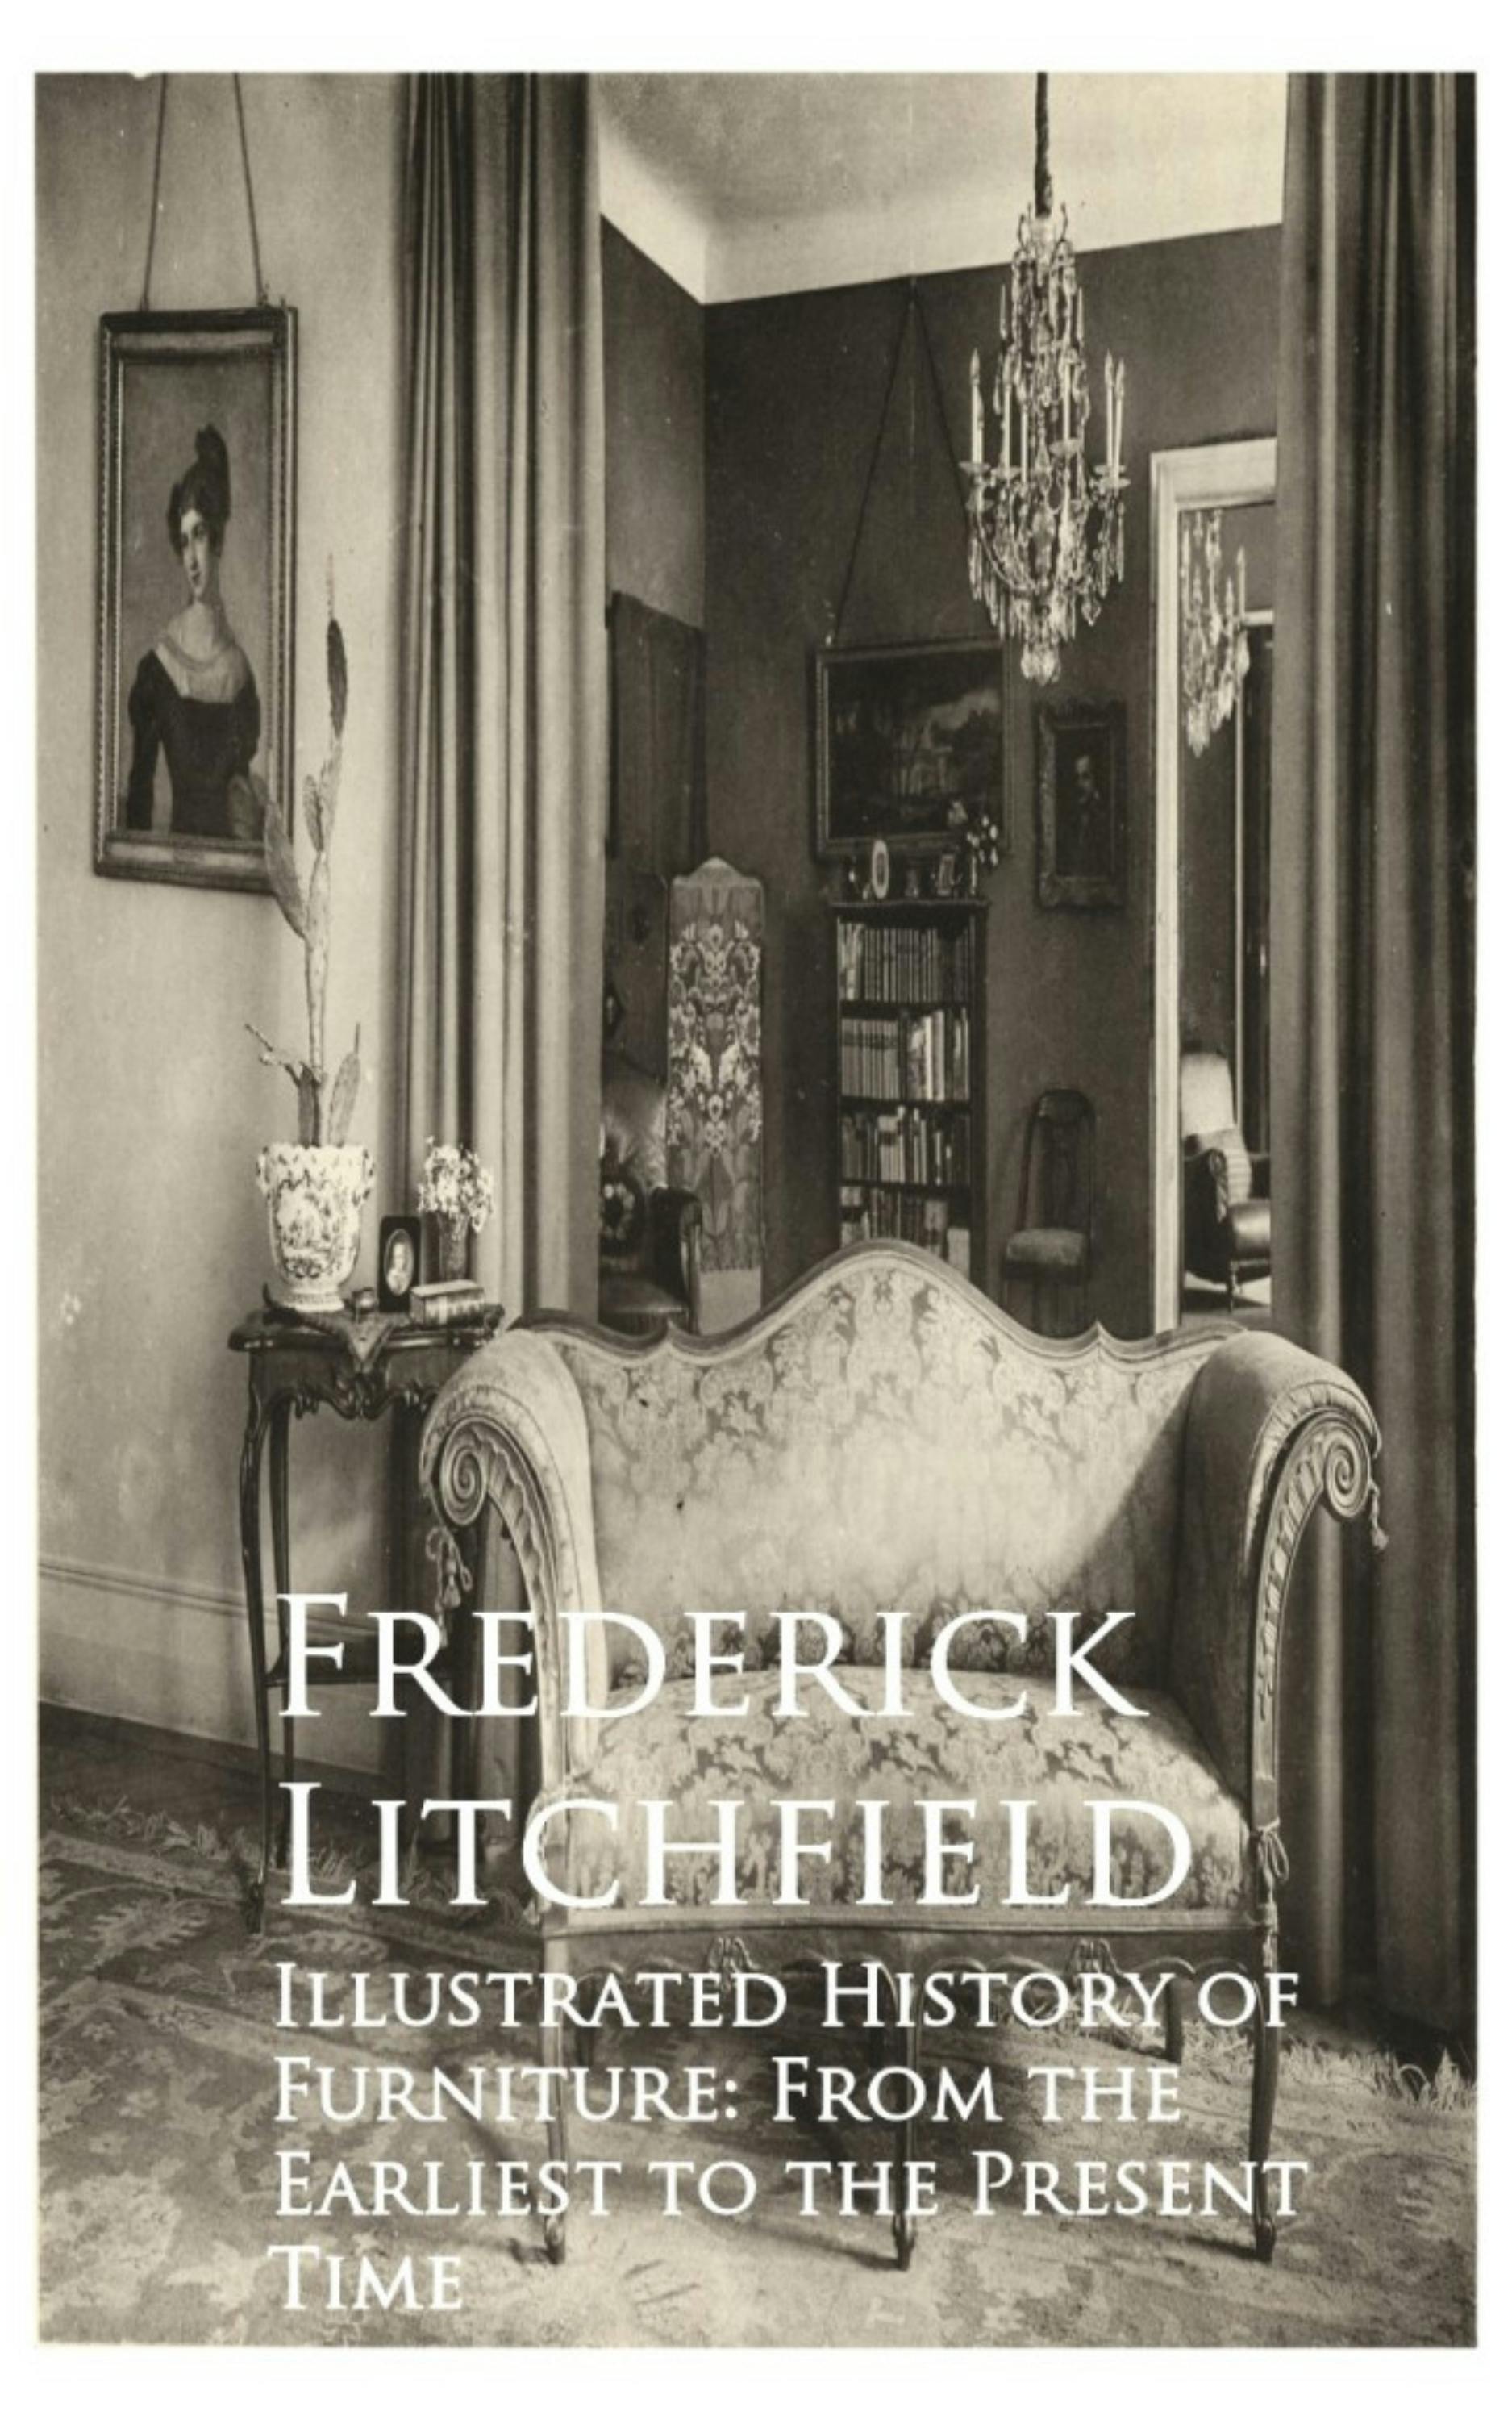 Illustrated History of Furniture: From the Earliest to the Present Time - Frederick Litchfield